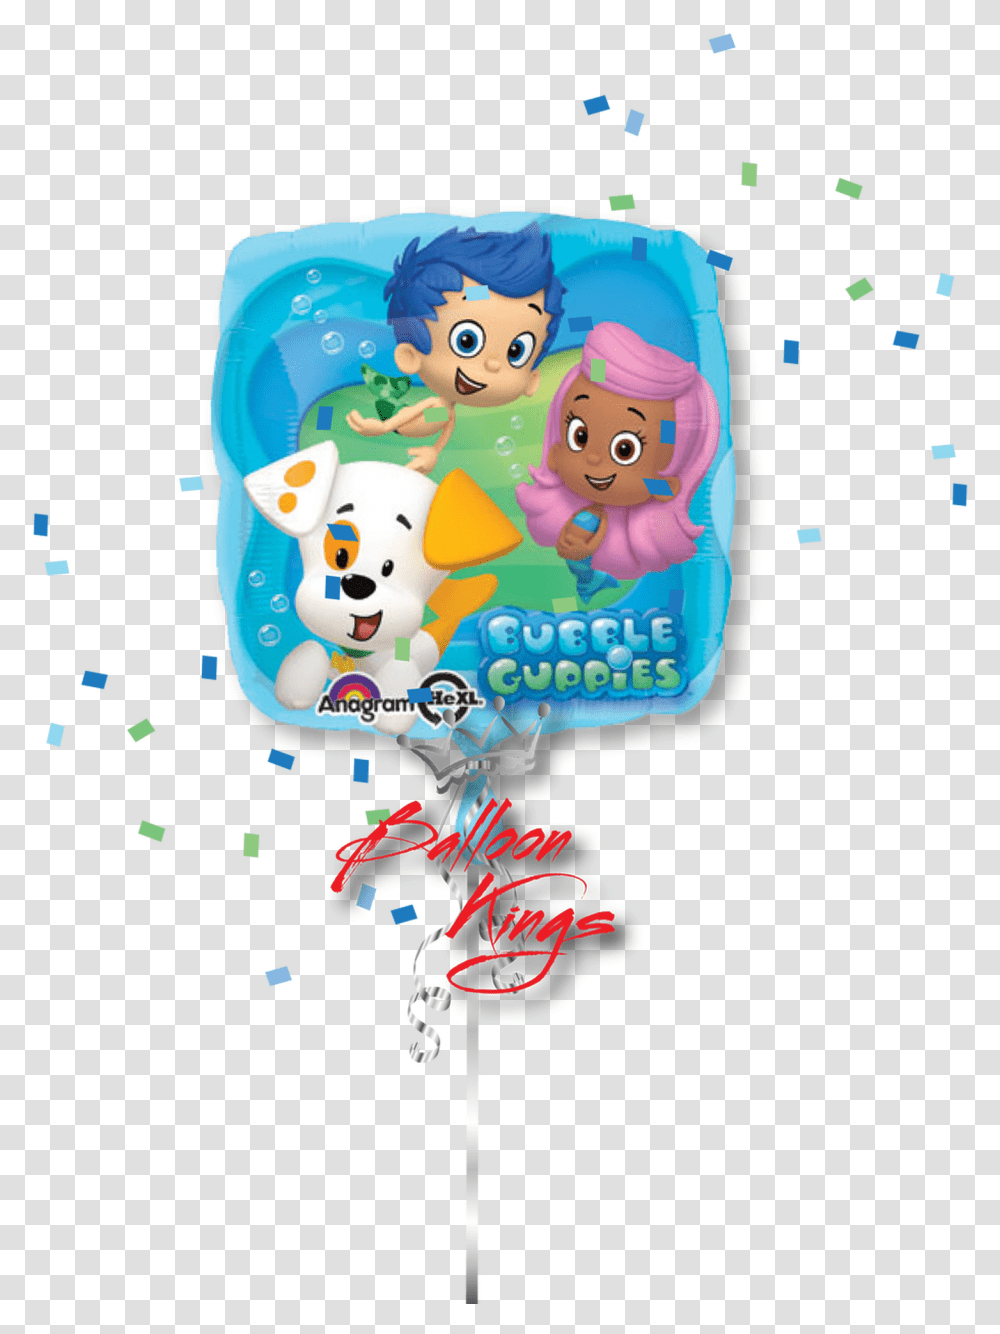 Bubble Guppies Square Bubble Guppies Happy Birthday, Bag, Paper, Backpack Transparent Png